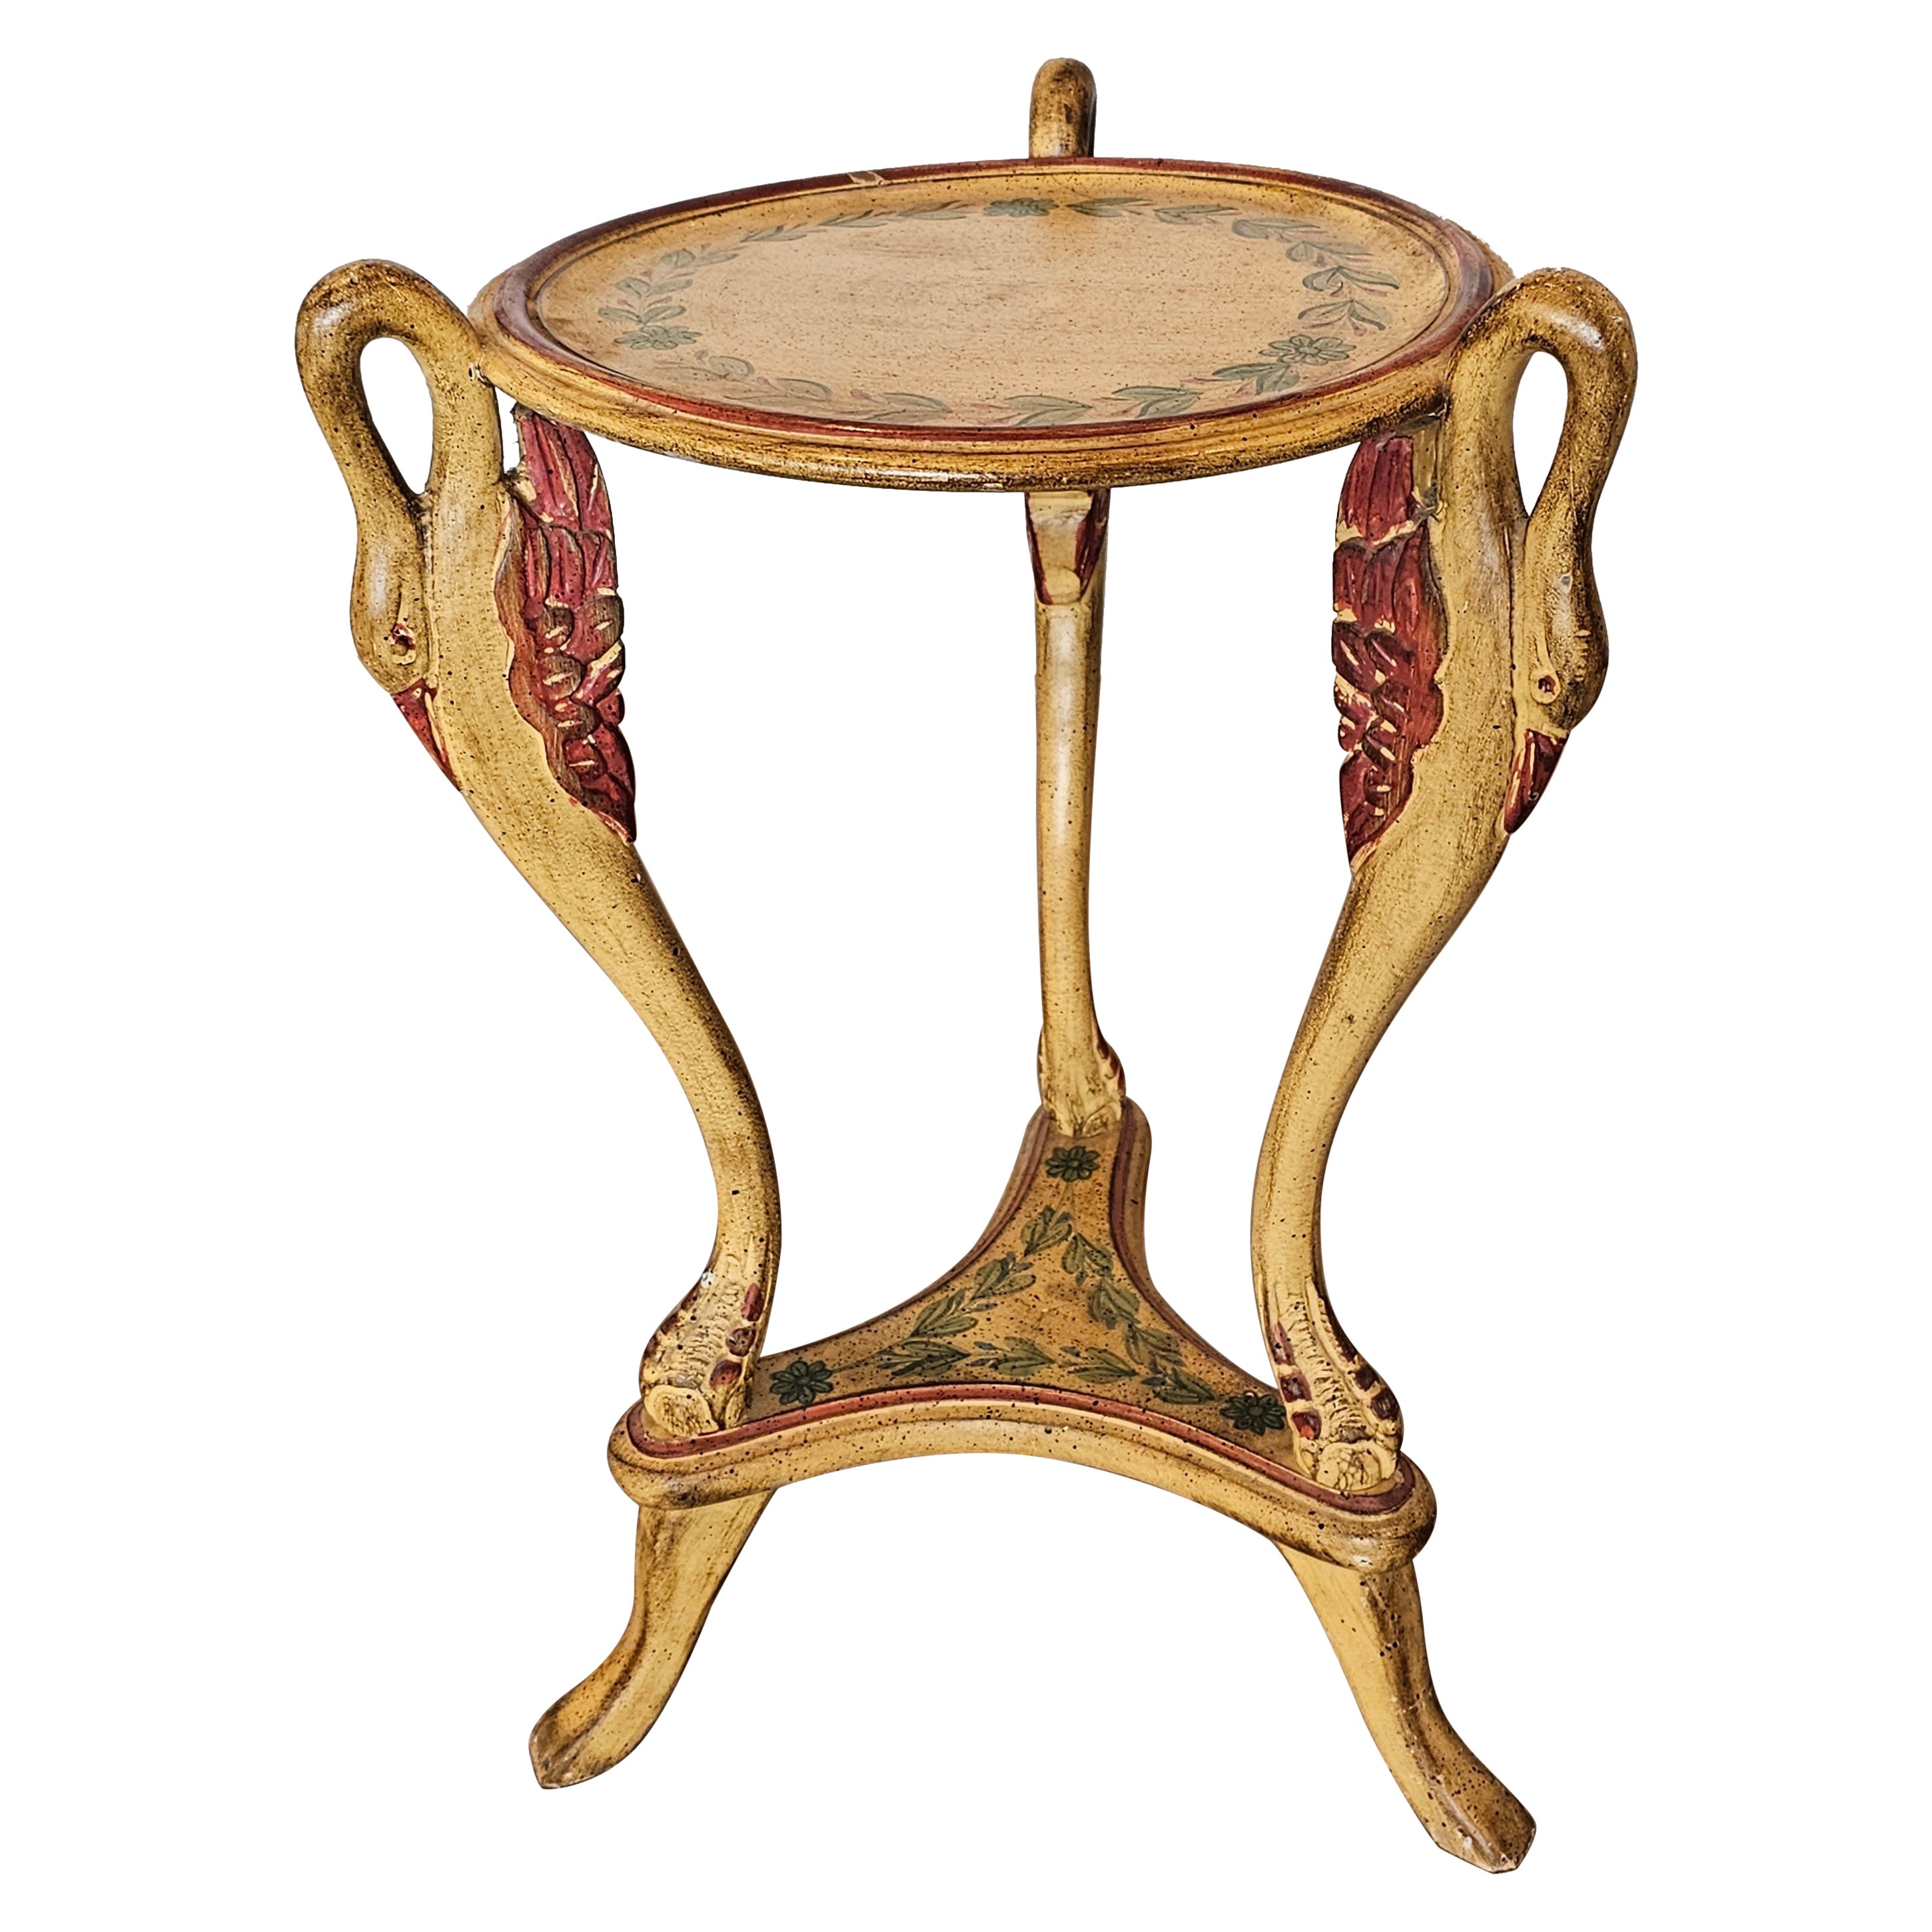 Vintage Neoclassical Revival Painted Swan Guéridon Table For Sale